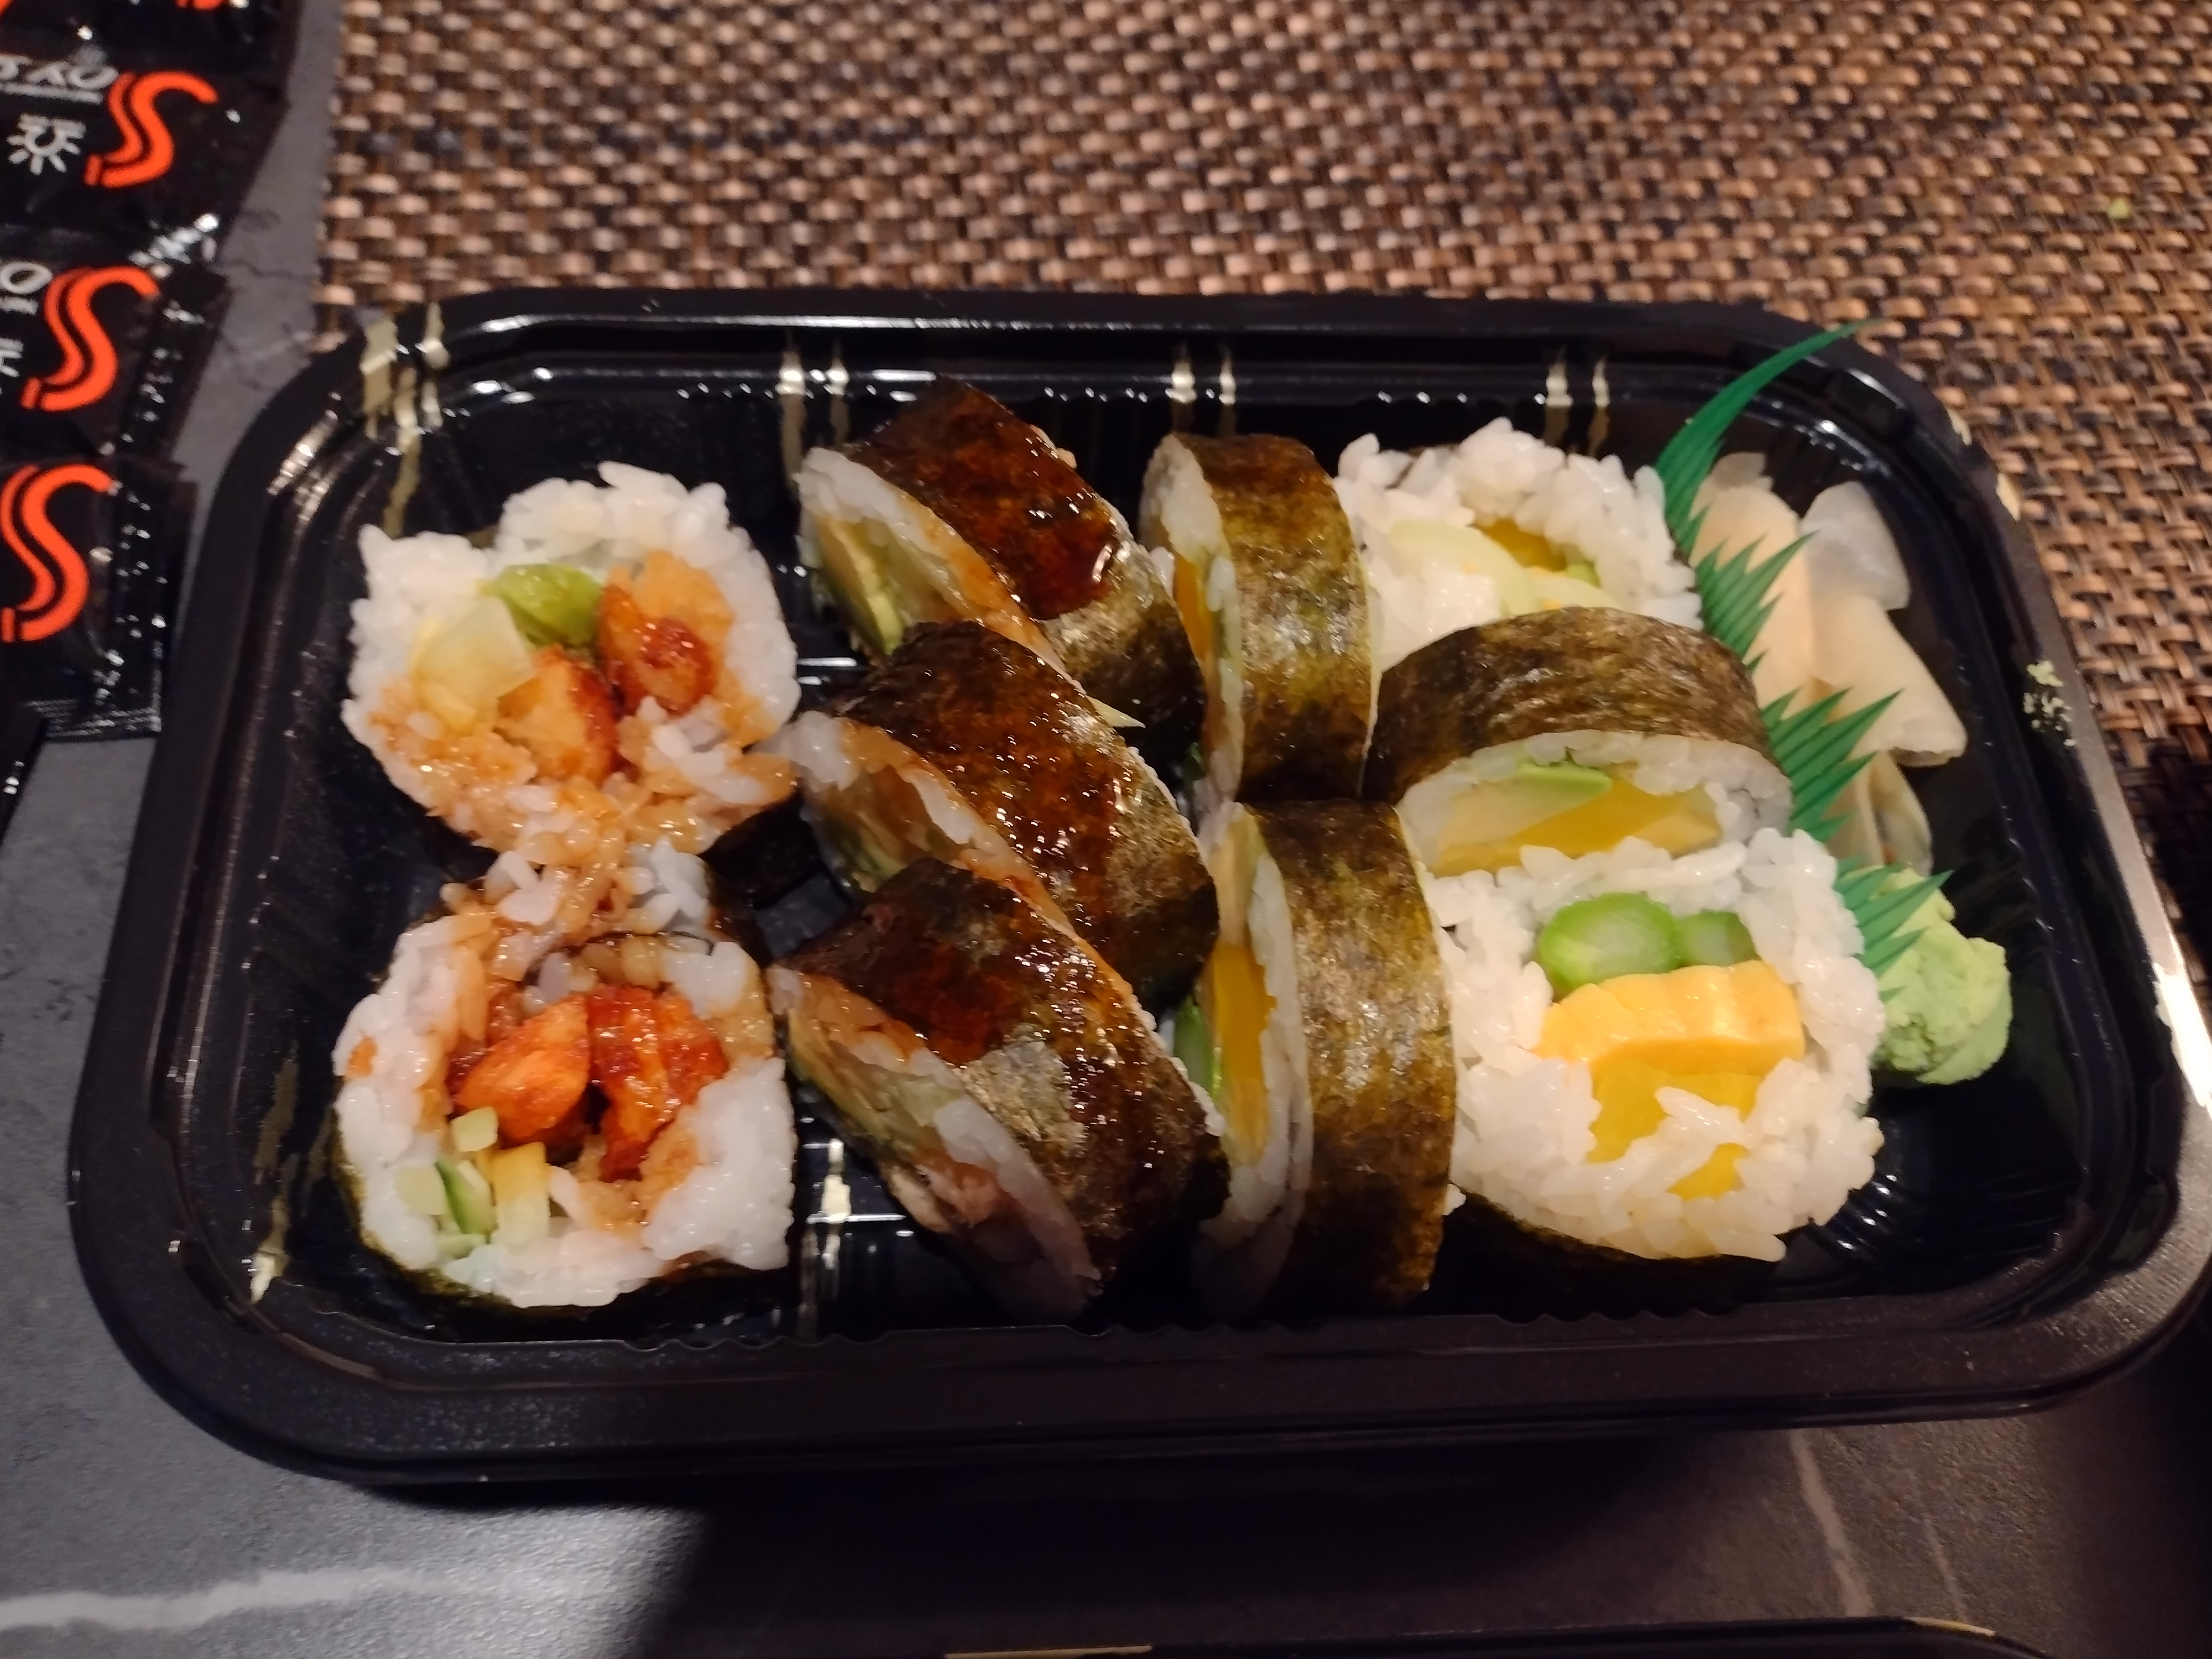 A salmon tempura roll and futomaki fill an entire black takeout container. Photo by Melkior Ornik.